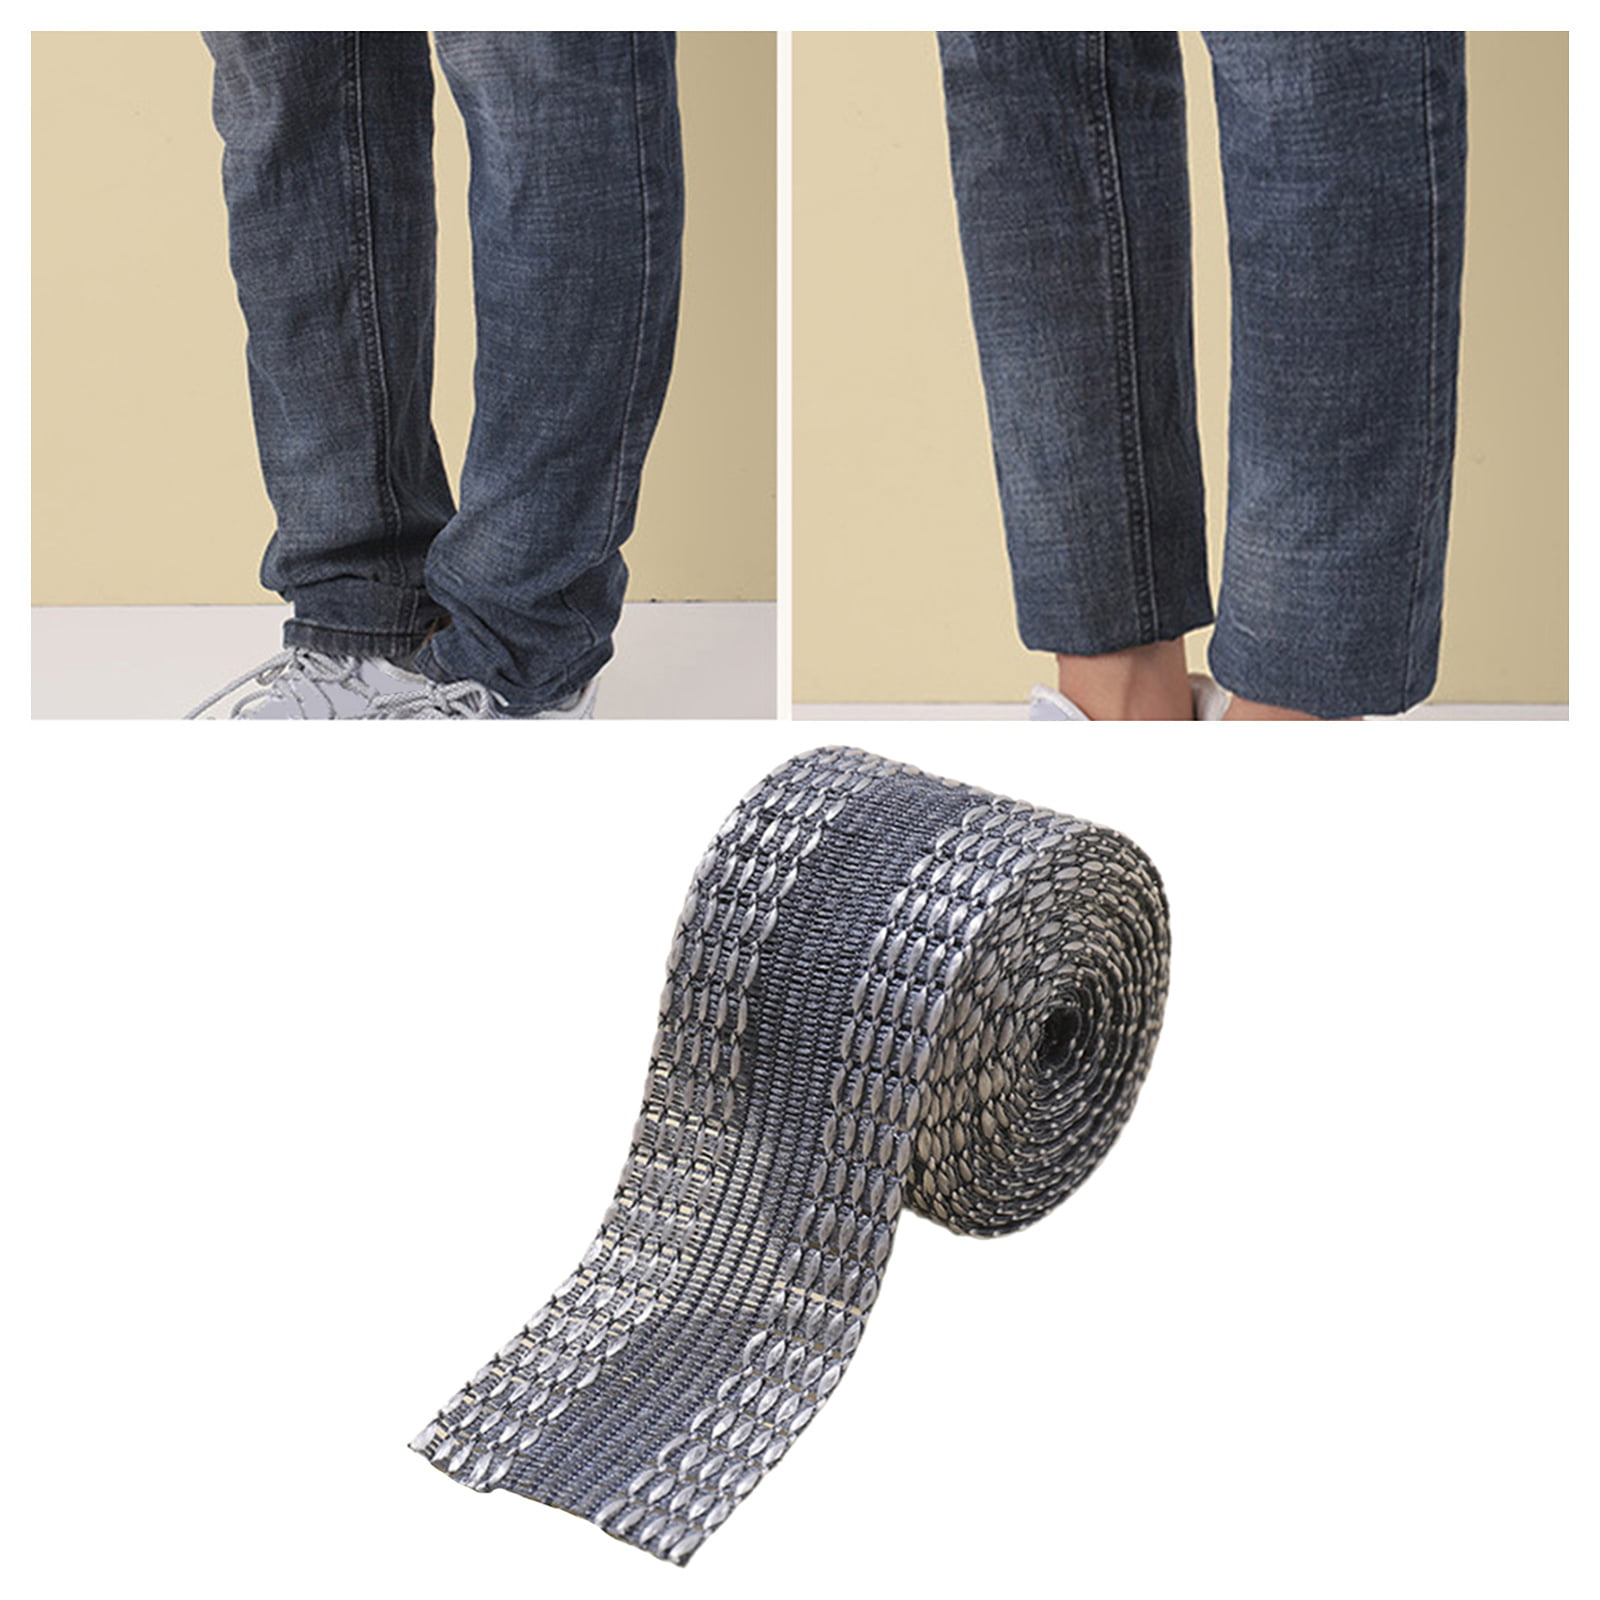 1Pcs 1/5/10M Iron-on Pants Edge Shorten Jean Pants No Sew Hemming  Self-Adhesive Sewing Fabric Tape Home DIY Sewing Accessories